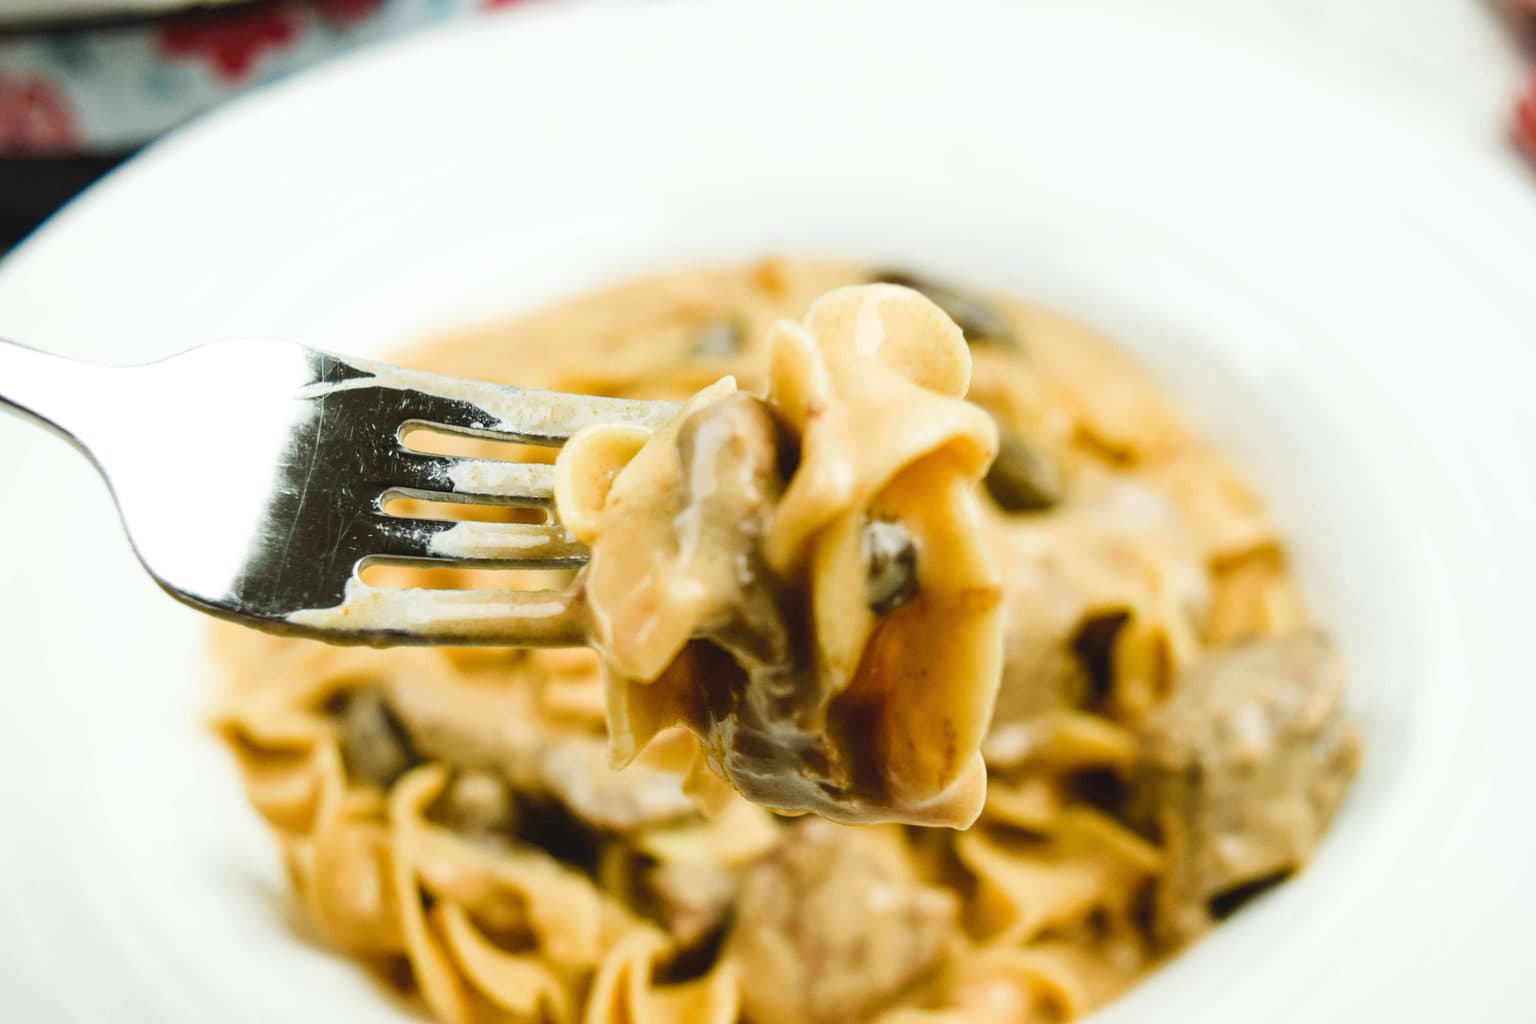 A bite of stroganoff on a fork in front of a bowl of stroganoff